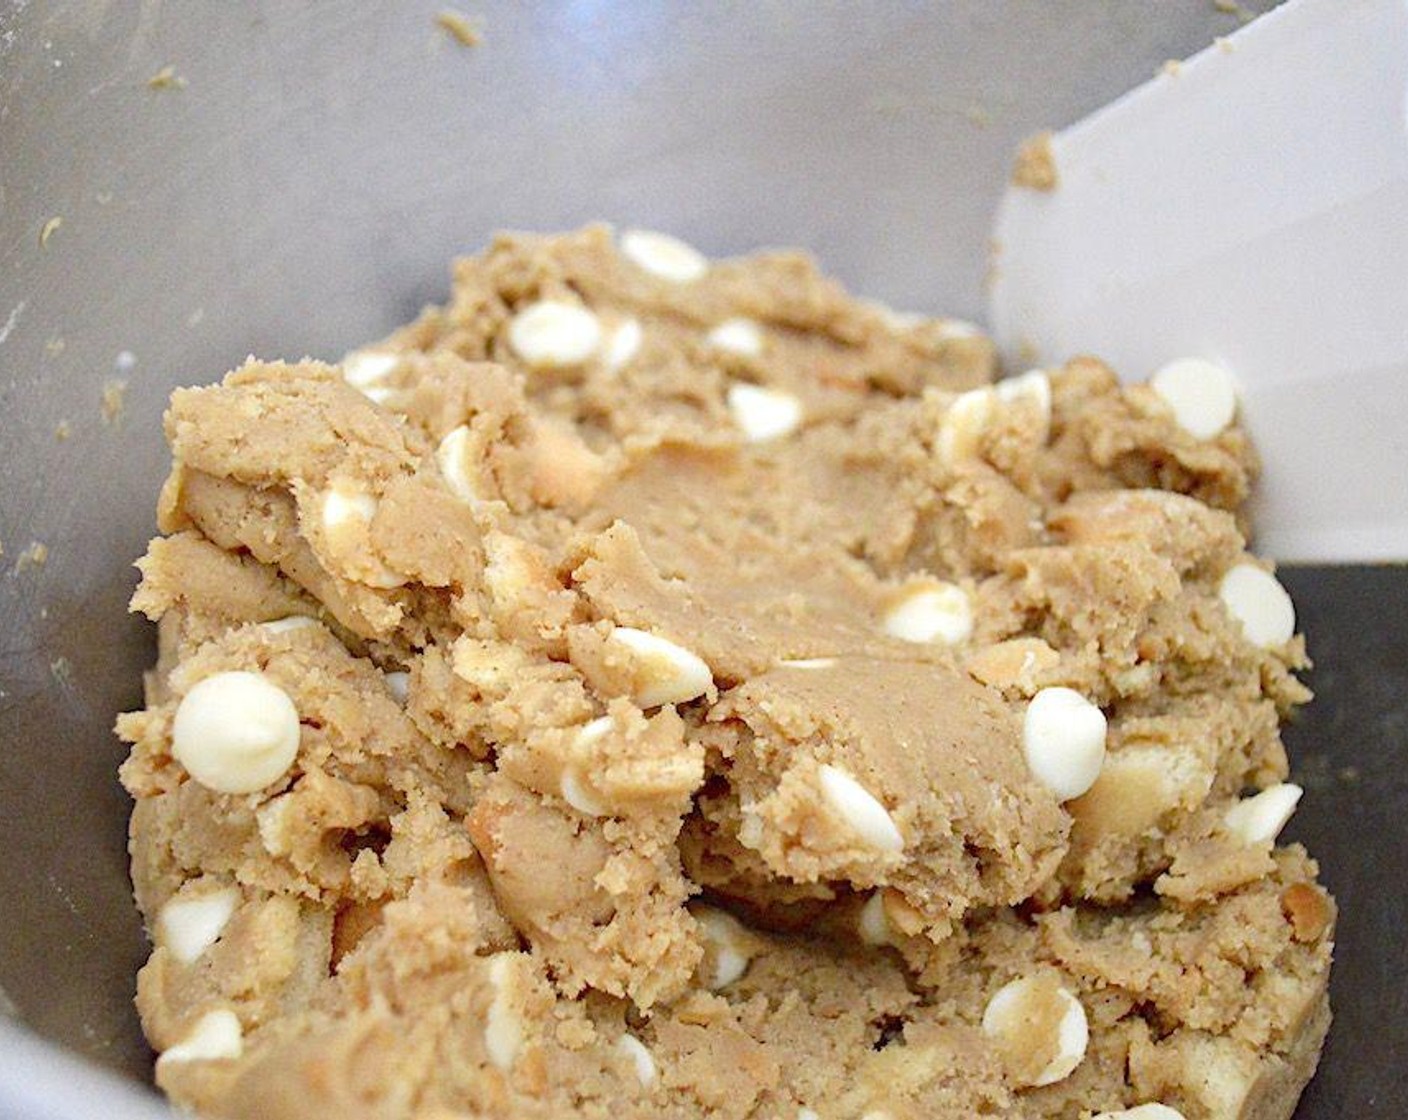 step 3 Then add in the Vanilla Extract (1 tsp) and Eggs (2) and let them get thoroughly mixed in. Finally, slowly add in the dry ingredients until a dough forms. Turn the mixer off and switch to a spatula to fold in the chopped Vanilla Wafers (1 cup) and White Chocolate Chips (3/4 cup).